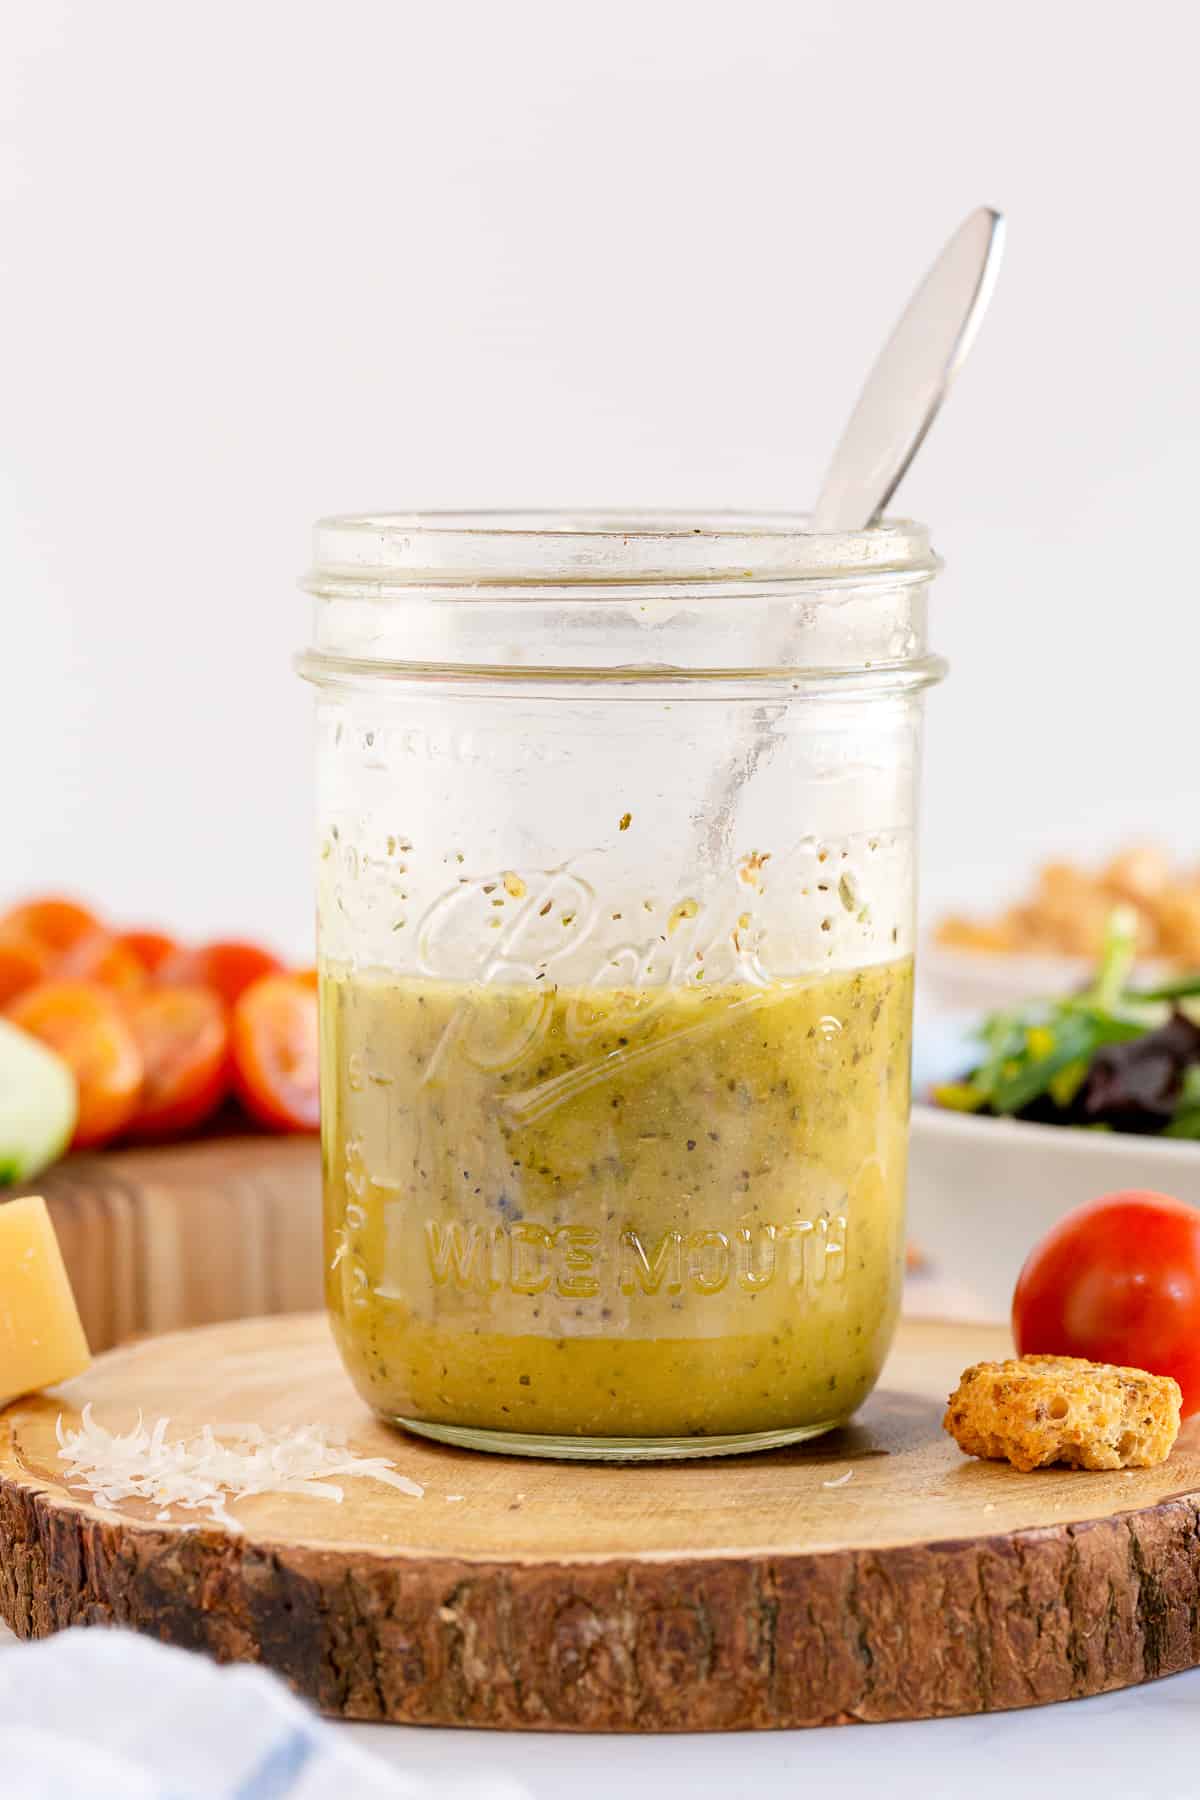 A mason jar filled with salad dressing and a spoon on a wood block.